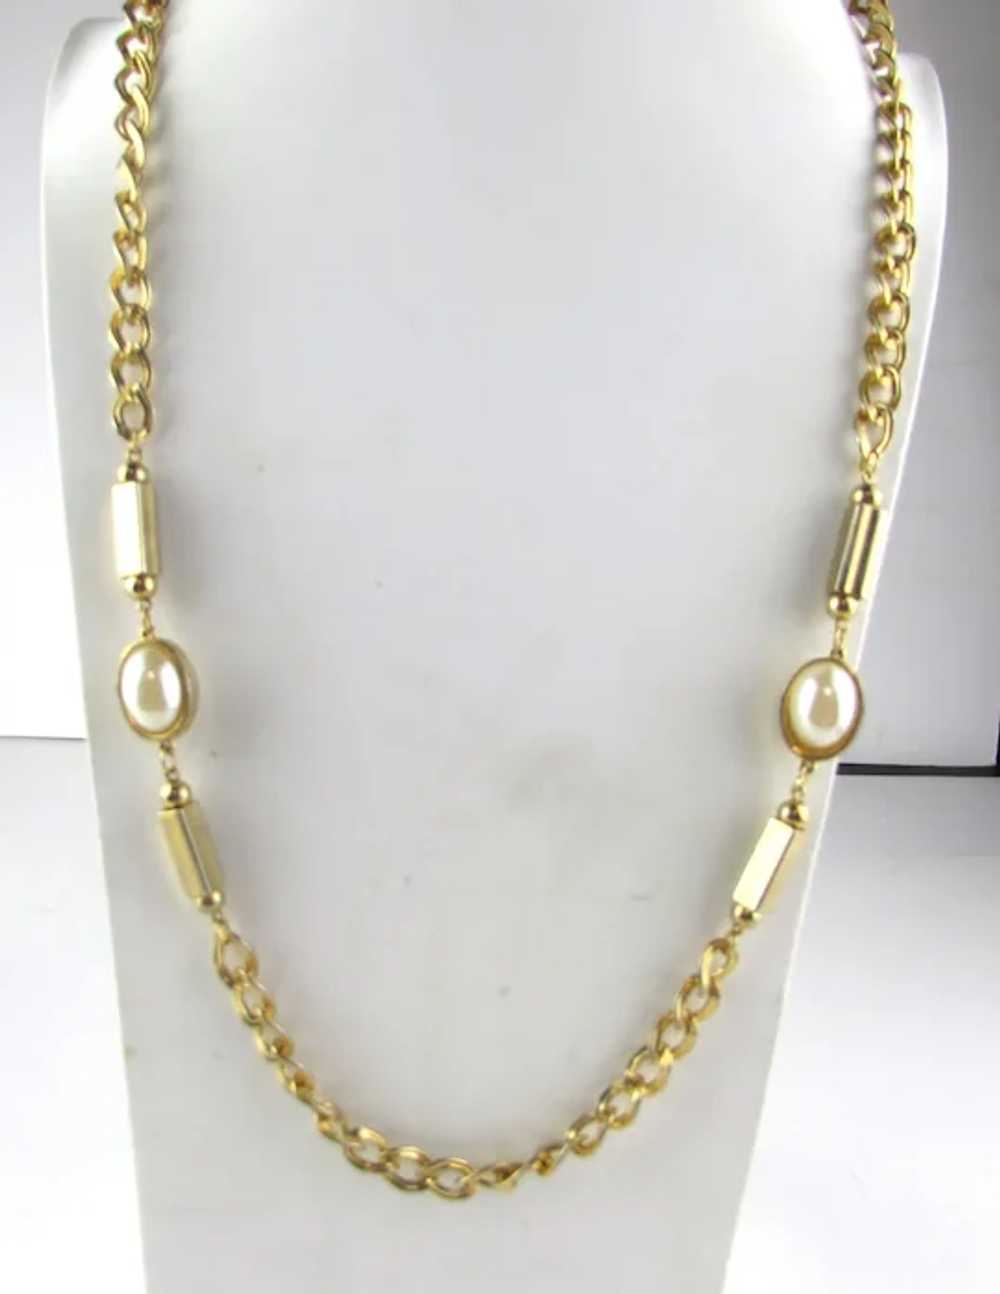 Gold Tone Heavy Chain With Faux Pearl Focals - image 3